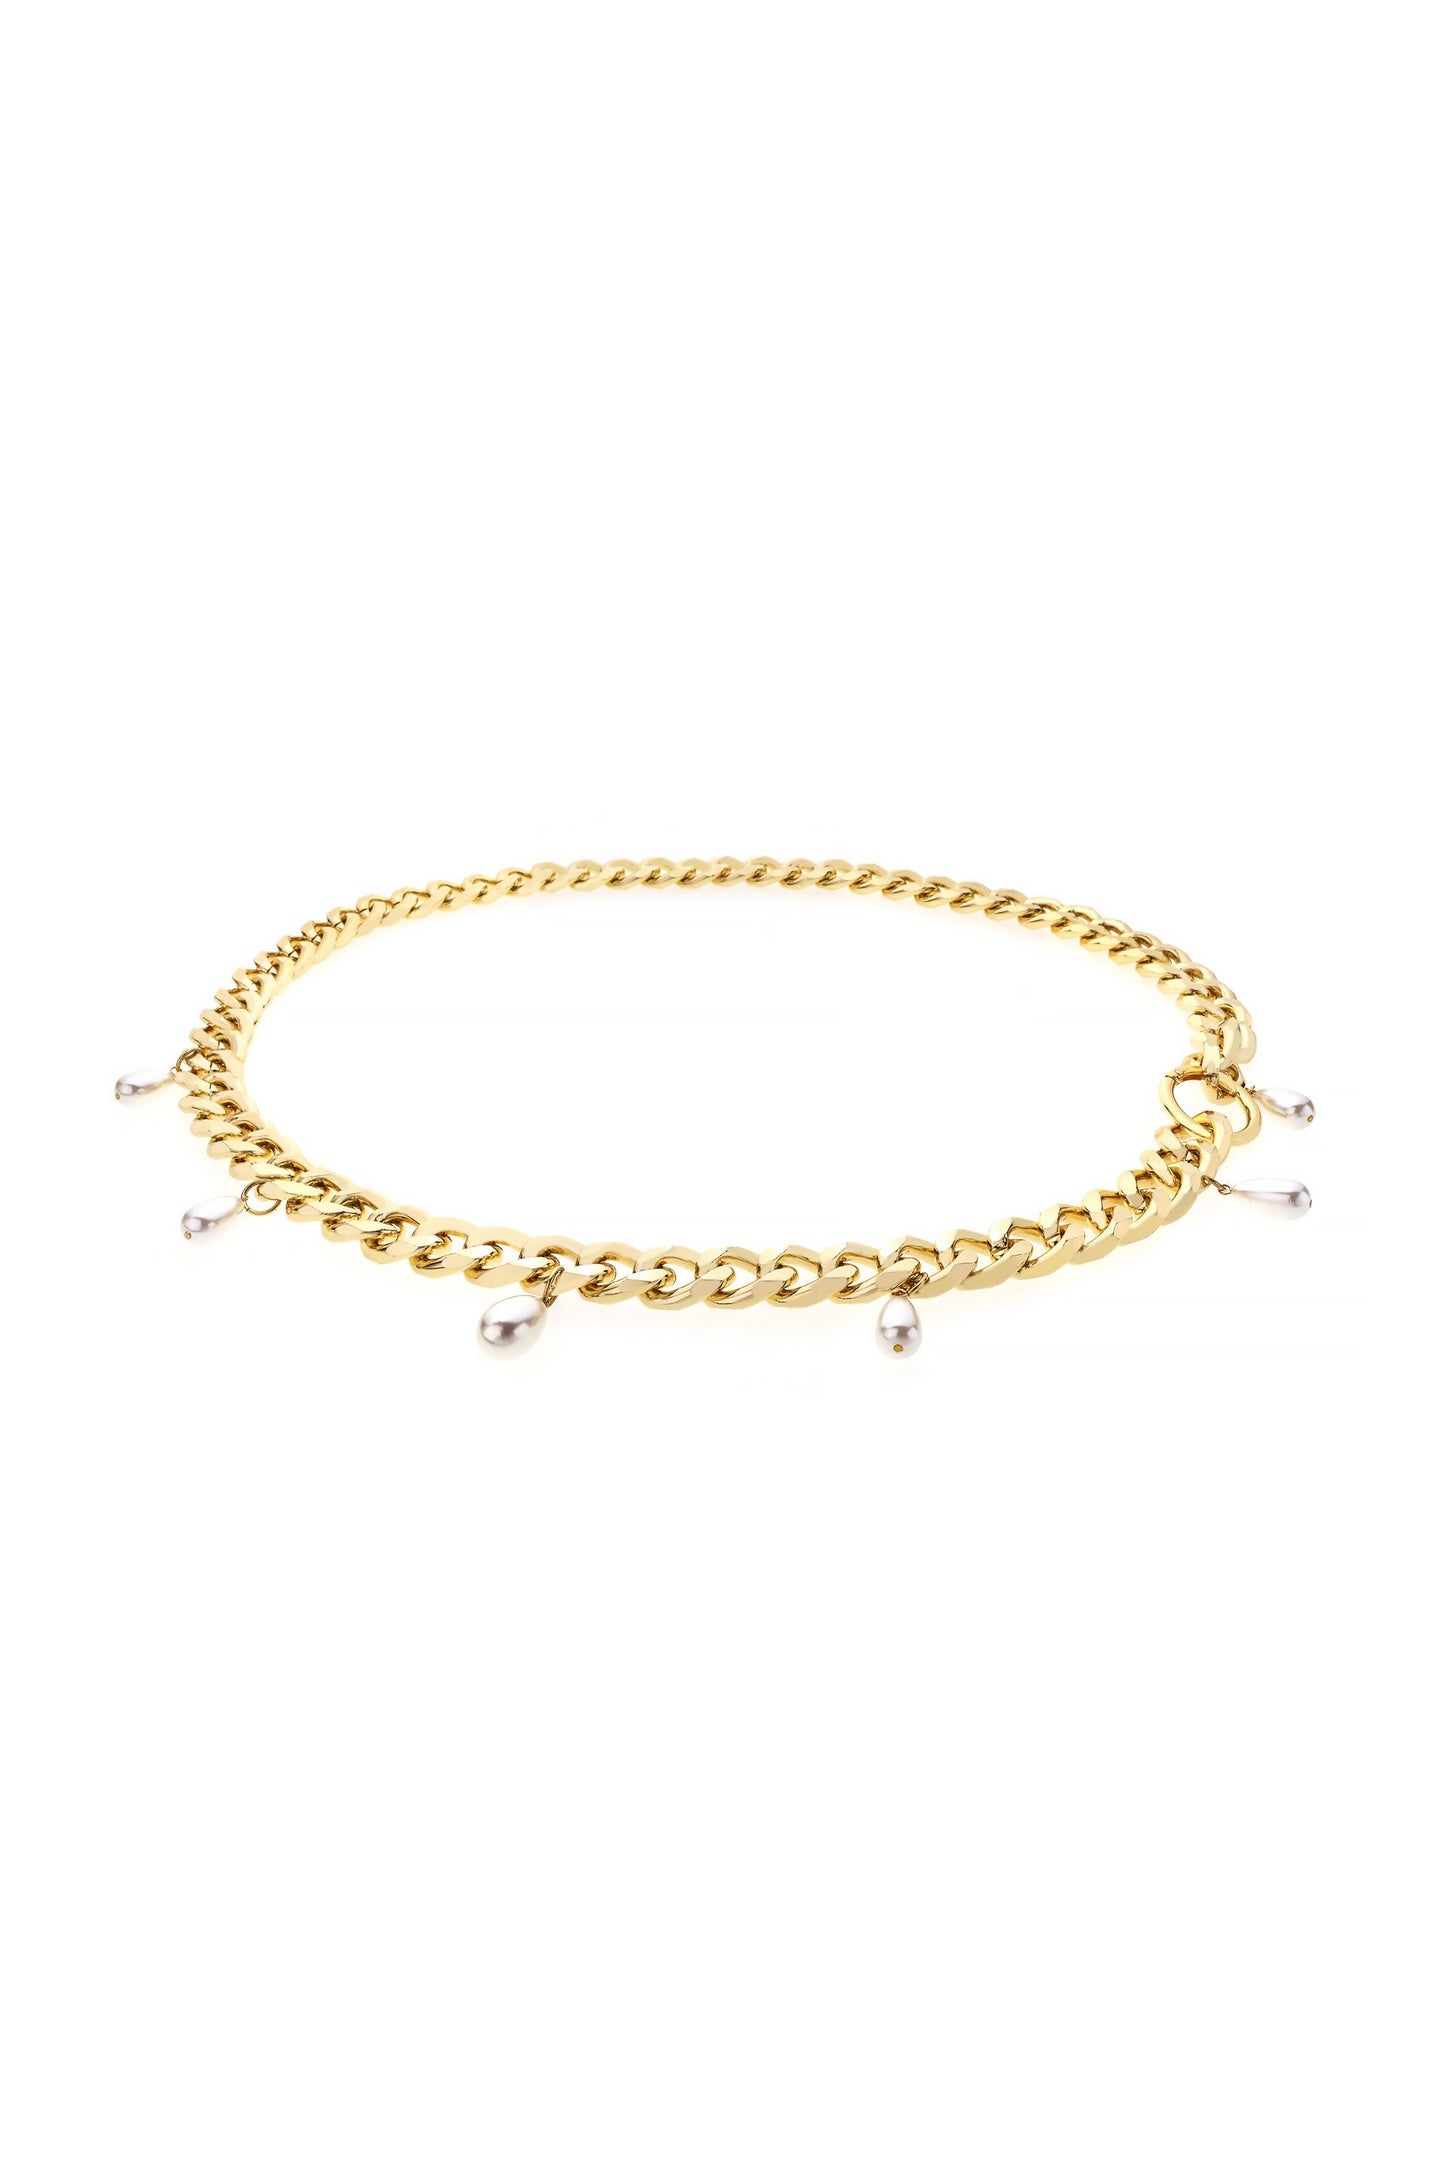 Pearl Dotted Chain Link Belt in Gold on white background